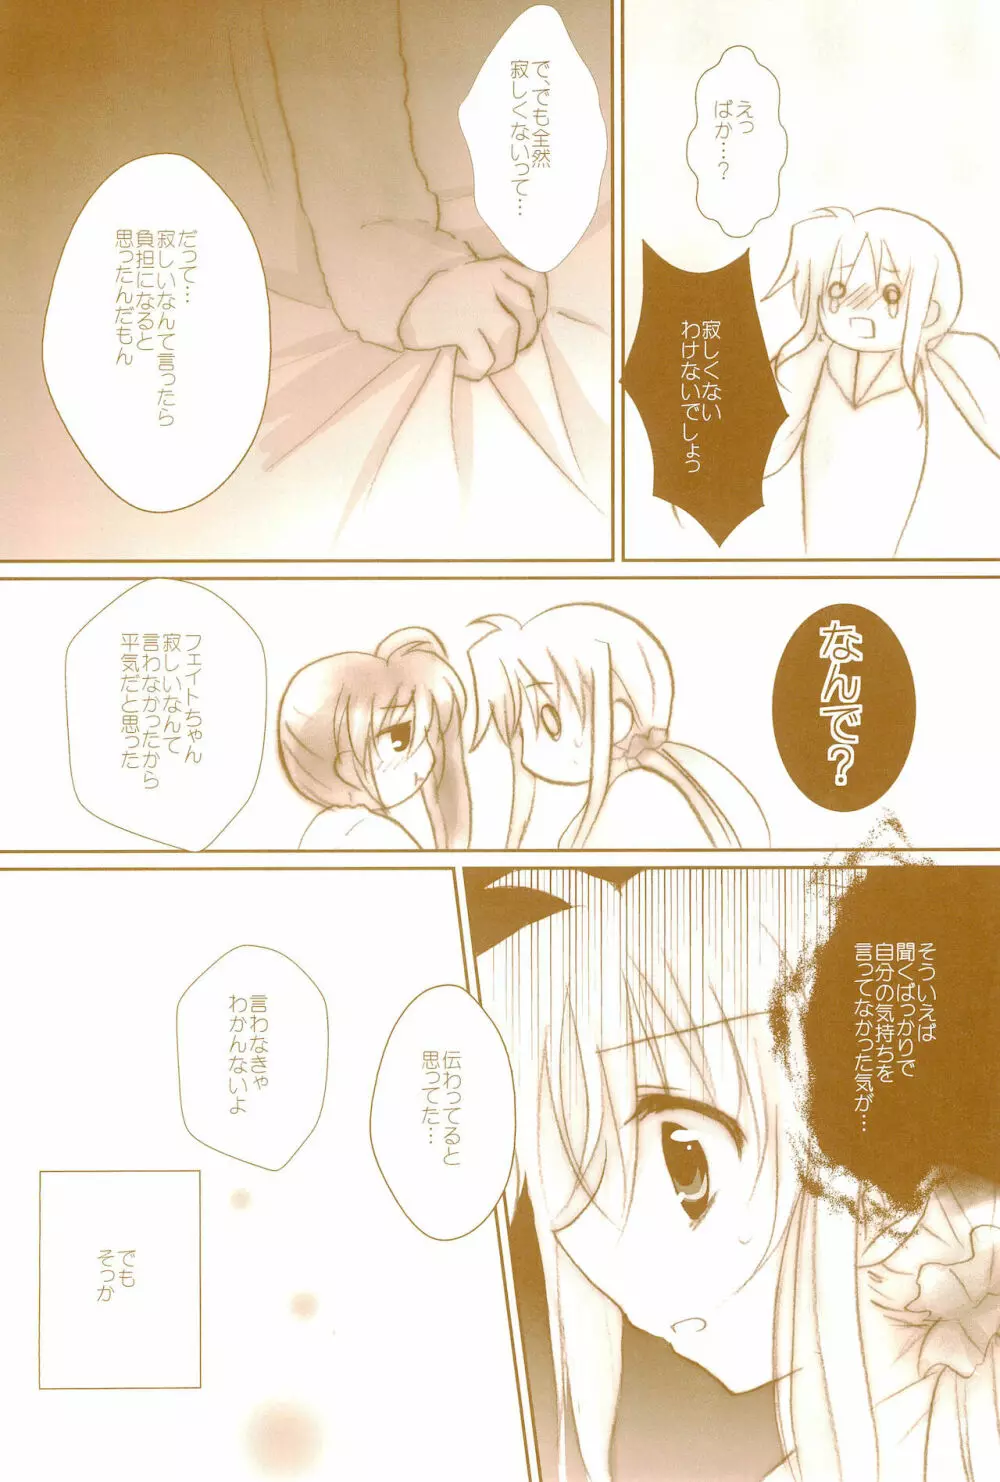 Love Life ～なのフェイなの再録集 3～ - page62